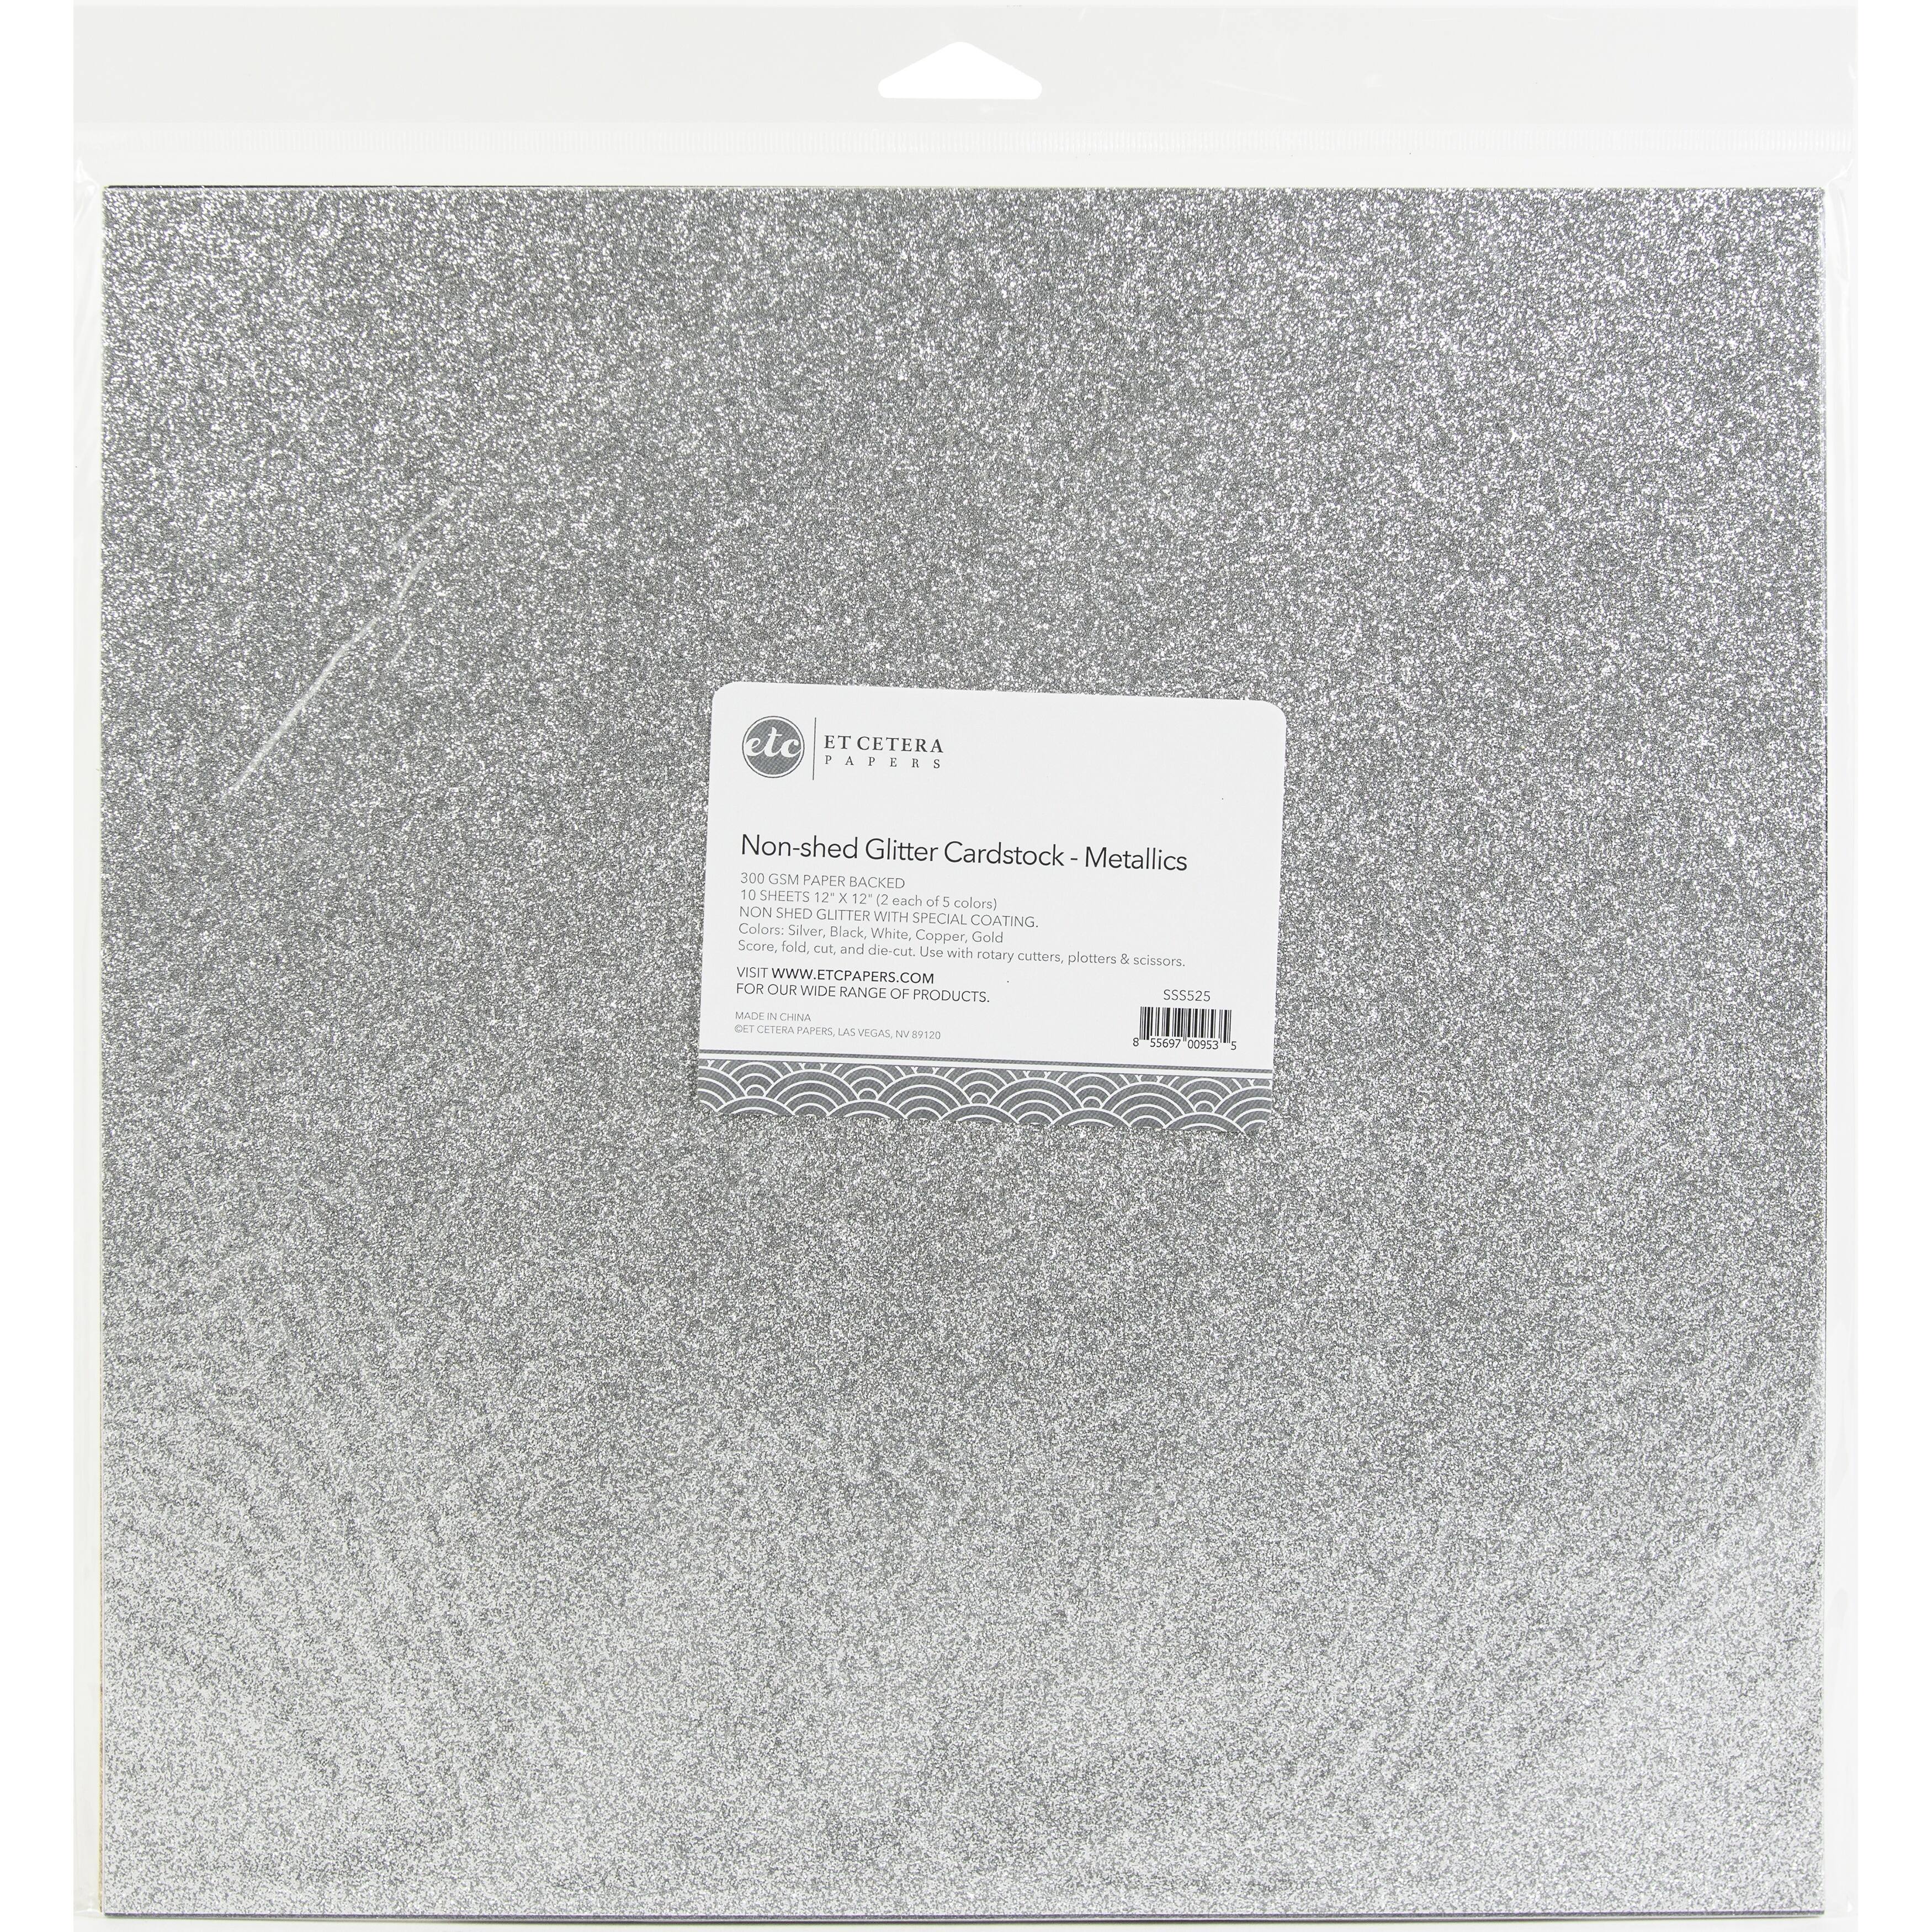 SSS5P10-17 ETC Papers Non-Shed Glitter Cardstock 12"X12" 10/Pkg-White 